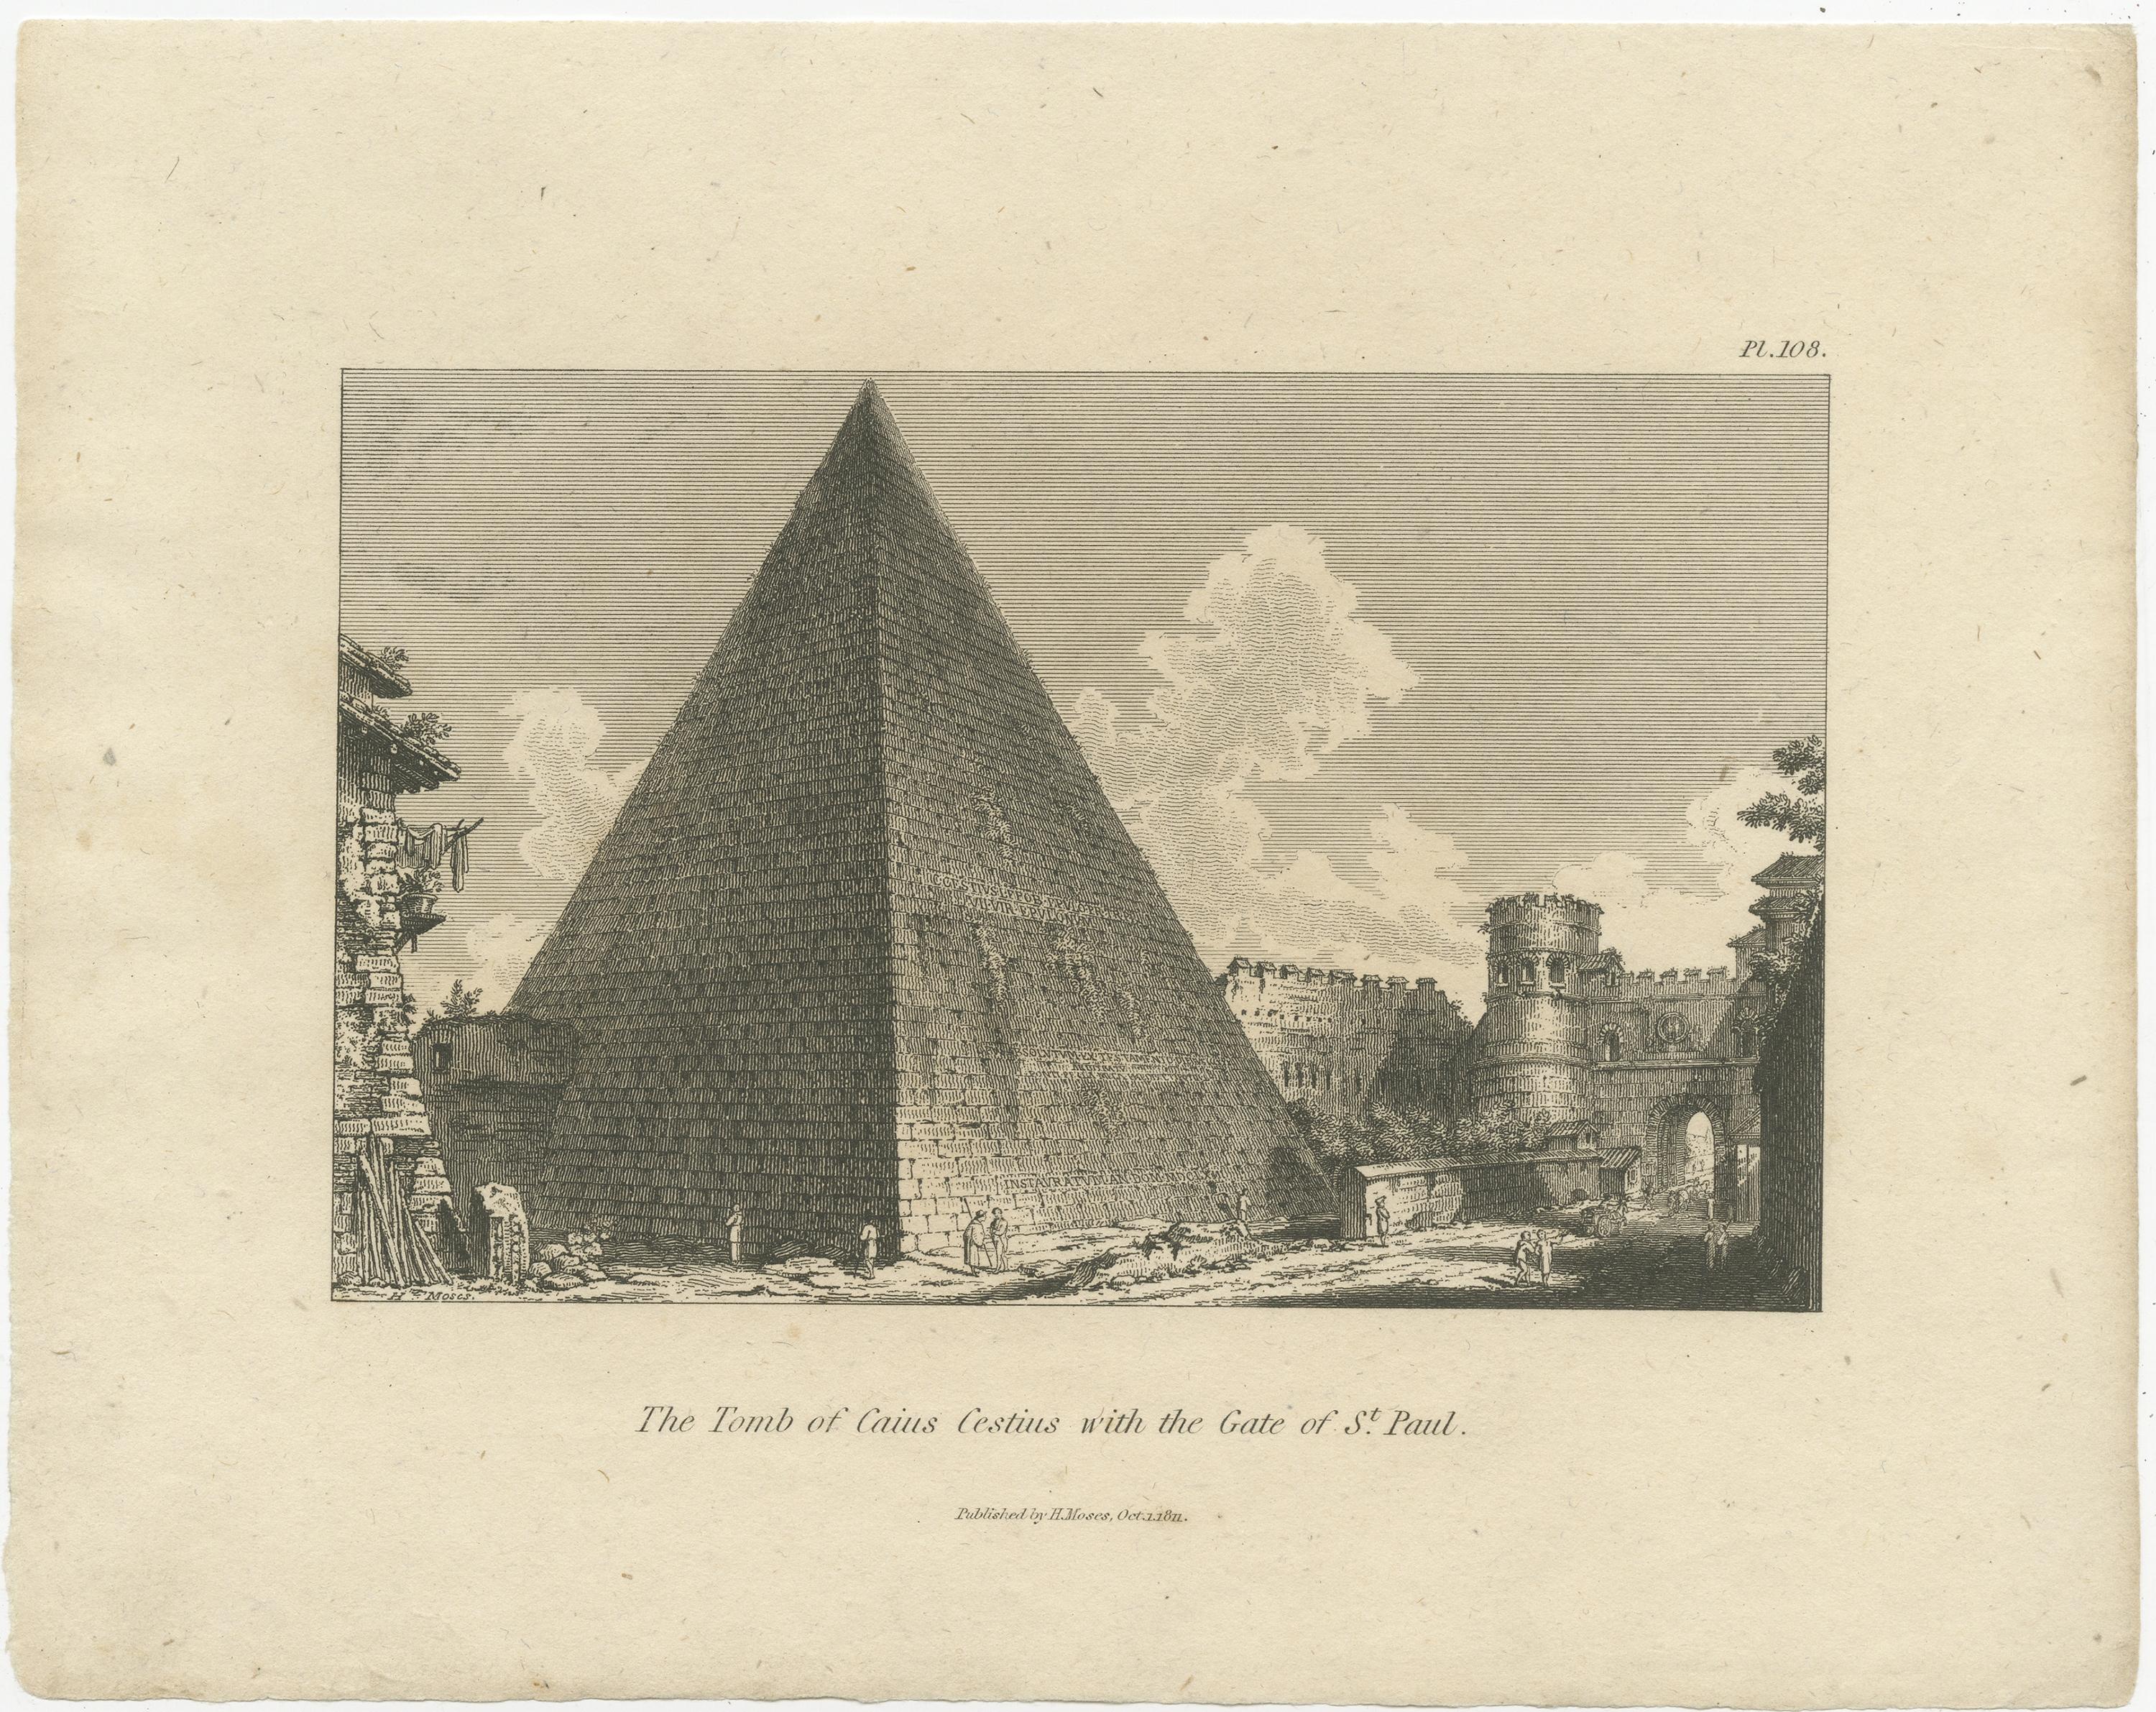 Description: Antique print titled 'The Tomb of Caius Cestius with the Gate of St. Paul'. Original antique print of the Pyramid of Cestius in Rome, Italy. This print originates from 'A Collection of Antique Vases, Altars (..)' published